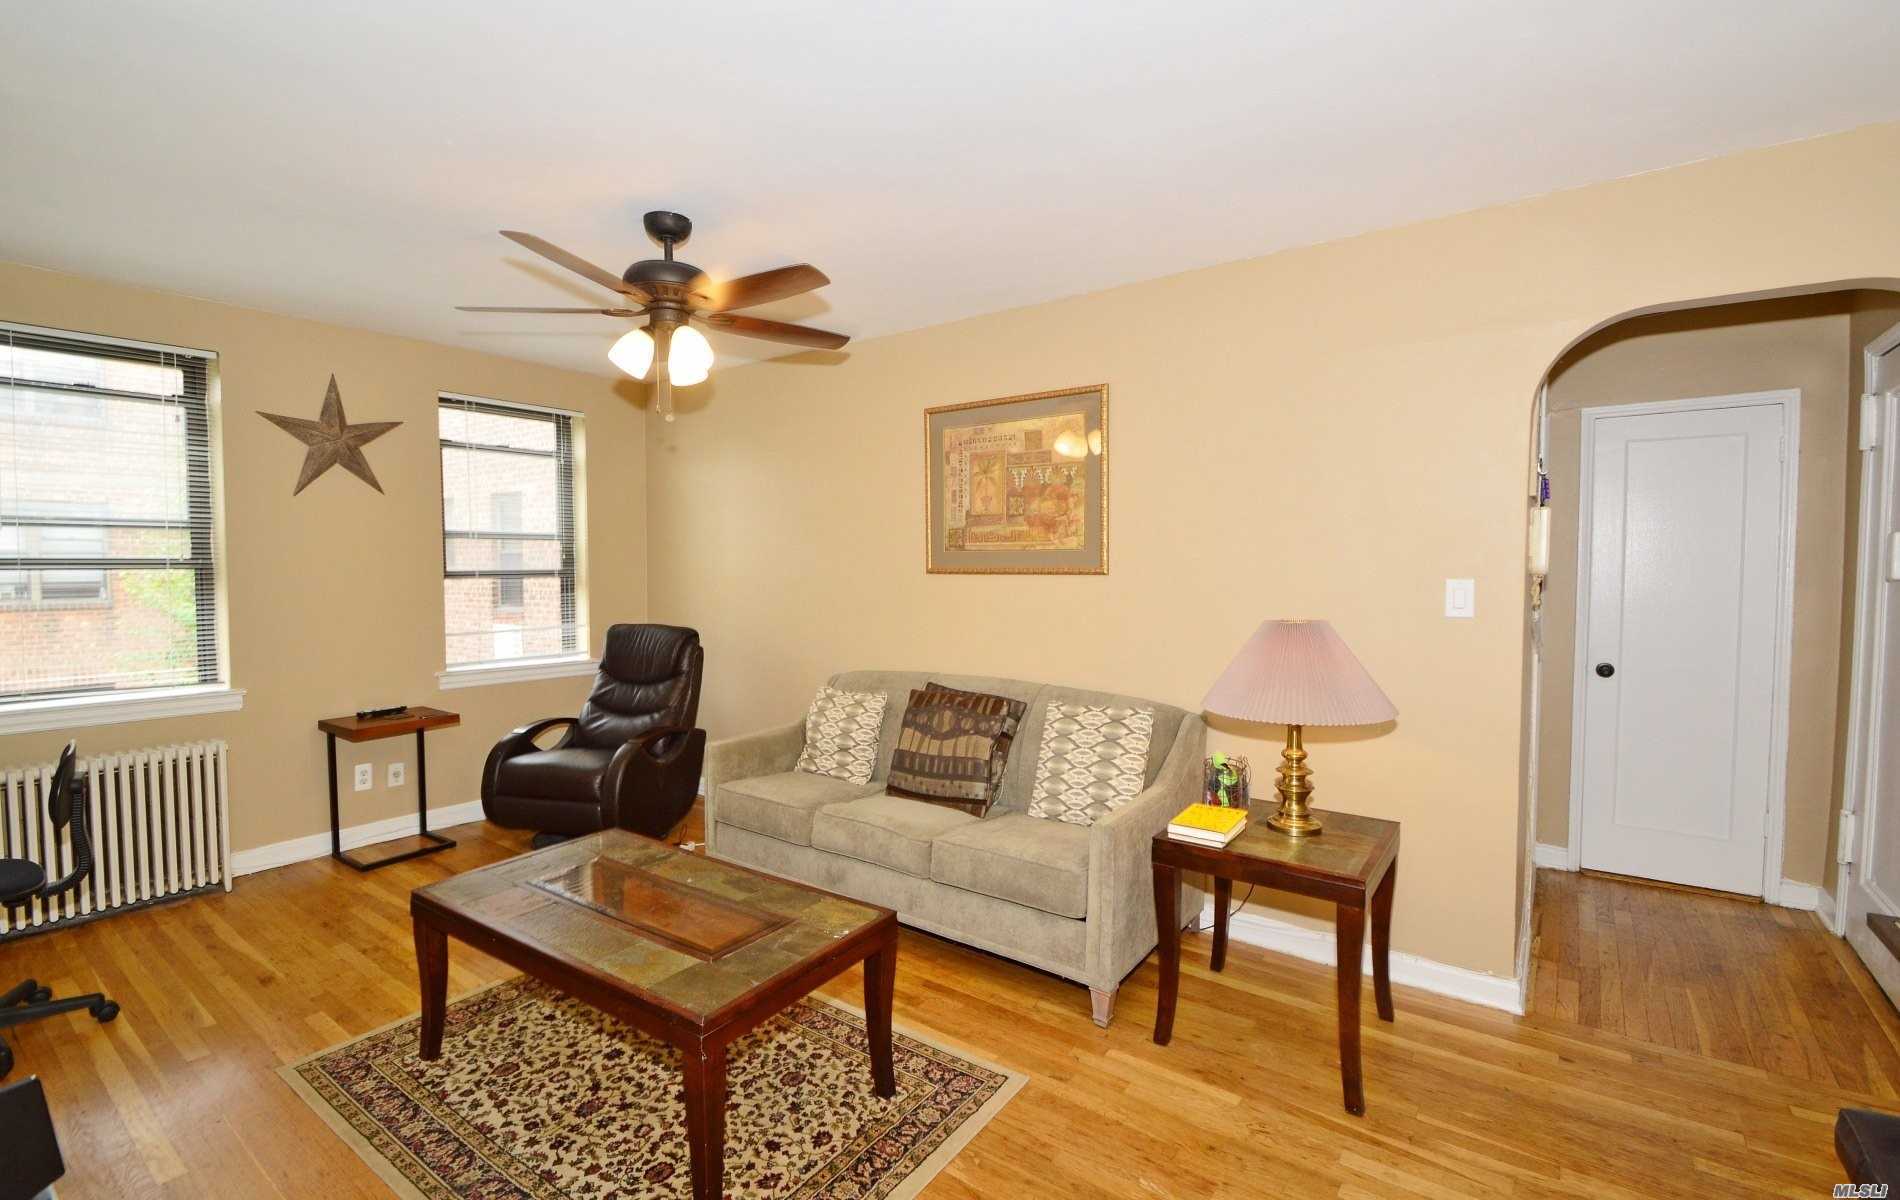 Spacious And Sun Filled One Bedroom; Located In Quiet Court Yard Setting. Close Proximity To Bustling Bell Blvd. Walk To Lirr, Close Proximity To Q27, Q12 & 13. Convenience And Affordability Make This A Must See!